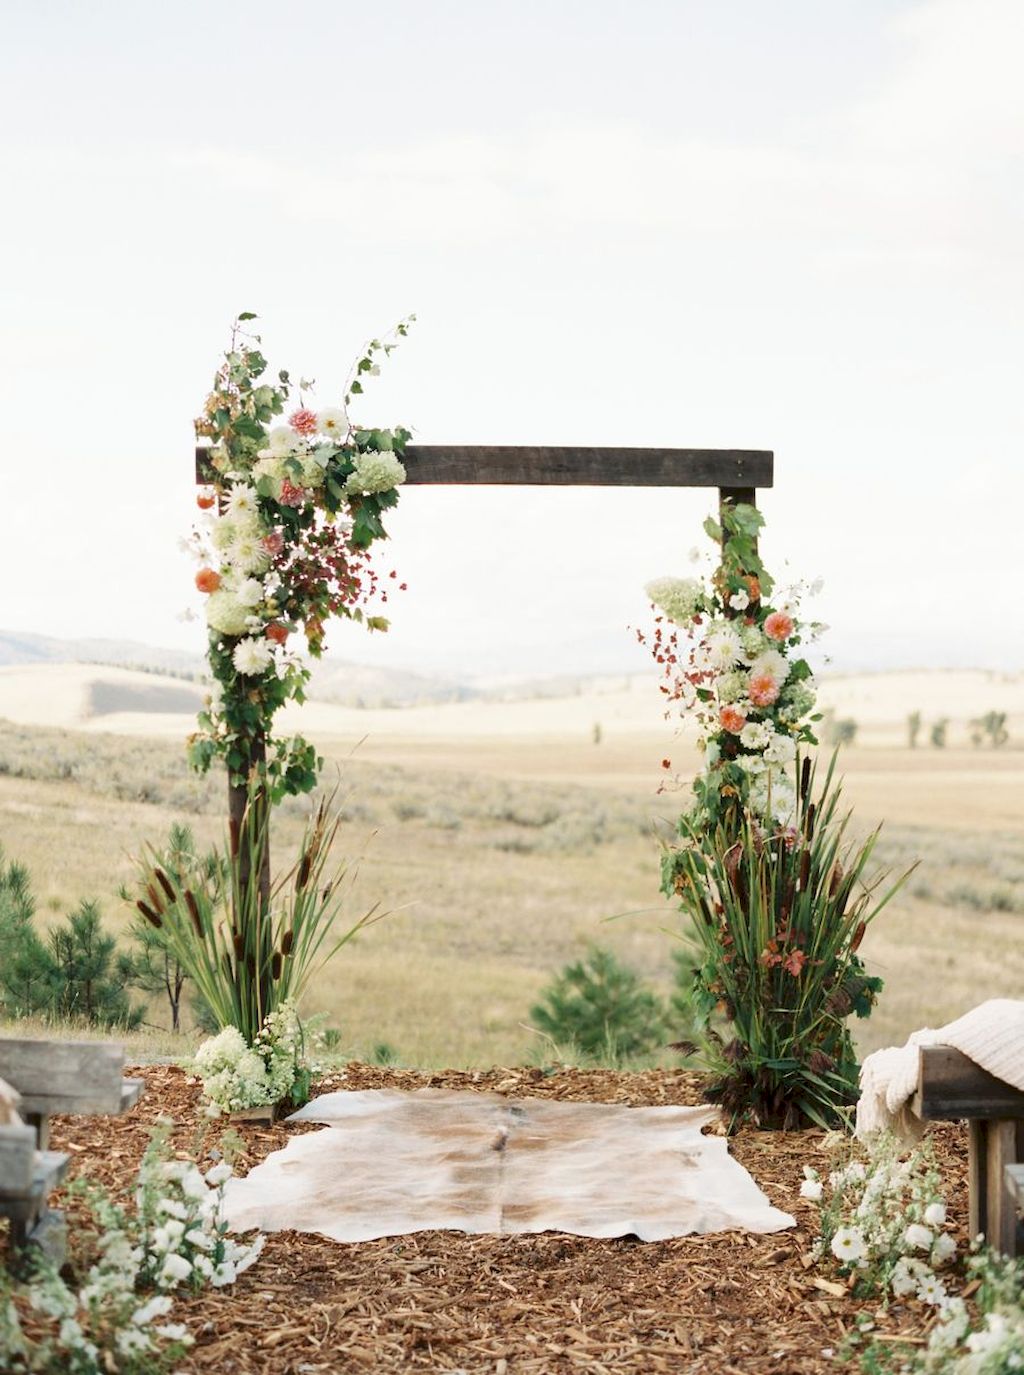 https://elonahome.com/wp-content/uploads/2018/09/Fall-wedding-decoration-idea-with-inspiring-autumn-decoration-and-fall-flowers-design-Part-53.jpg